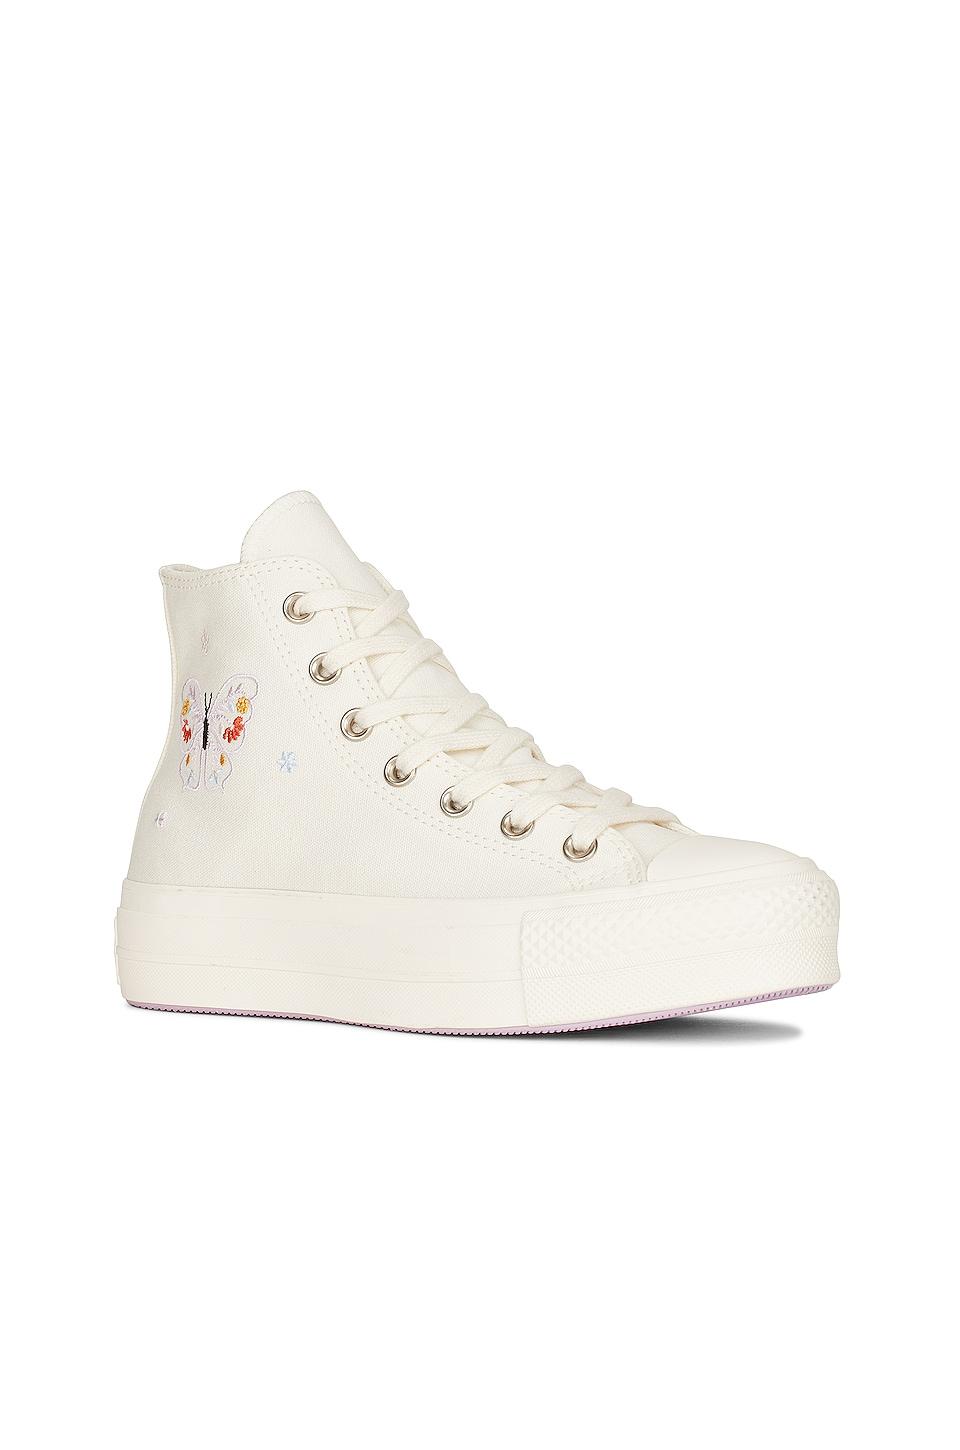 Converse Chuck Taylor All Star Hi Lift Spread Your Wings Sneaker in Natural  | Lyst